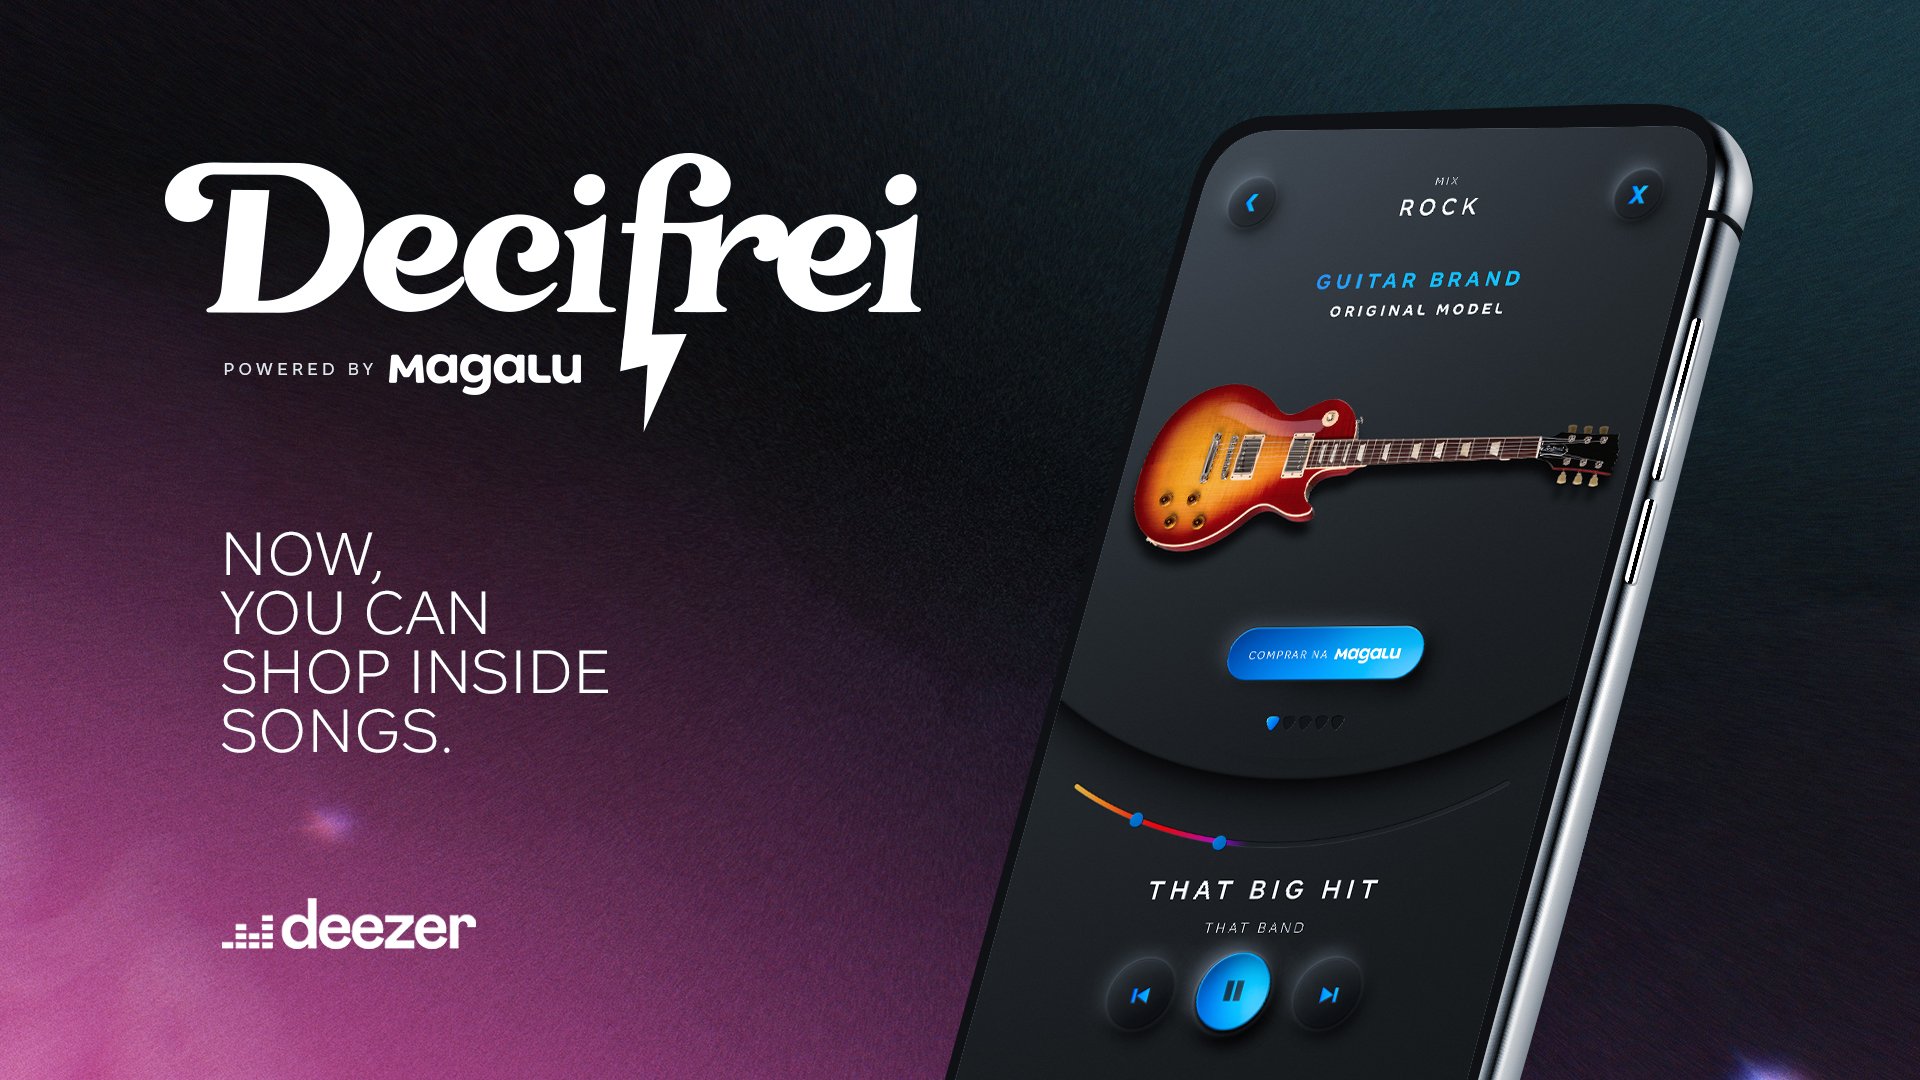 Brazilian omnichannel retailer Magalu’s initiative to sell musical instruments through a streaming song service is having reverberations across the global music and entertainment industry.|Magalu|Decifrei